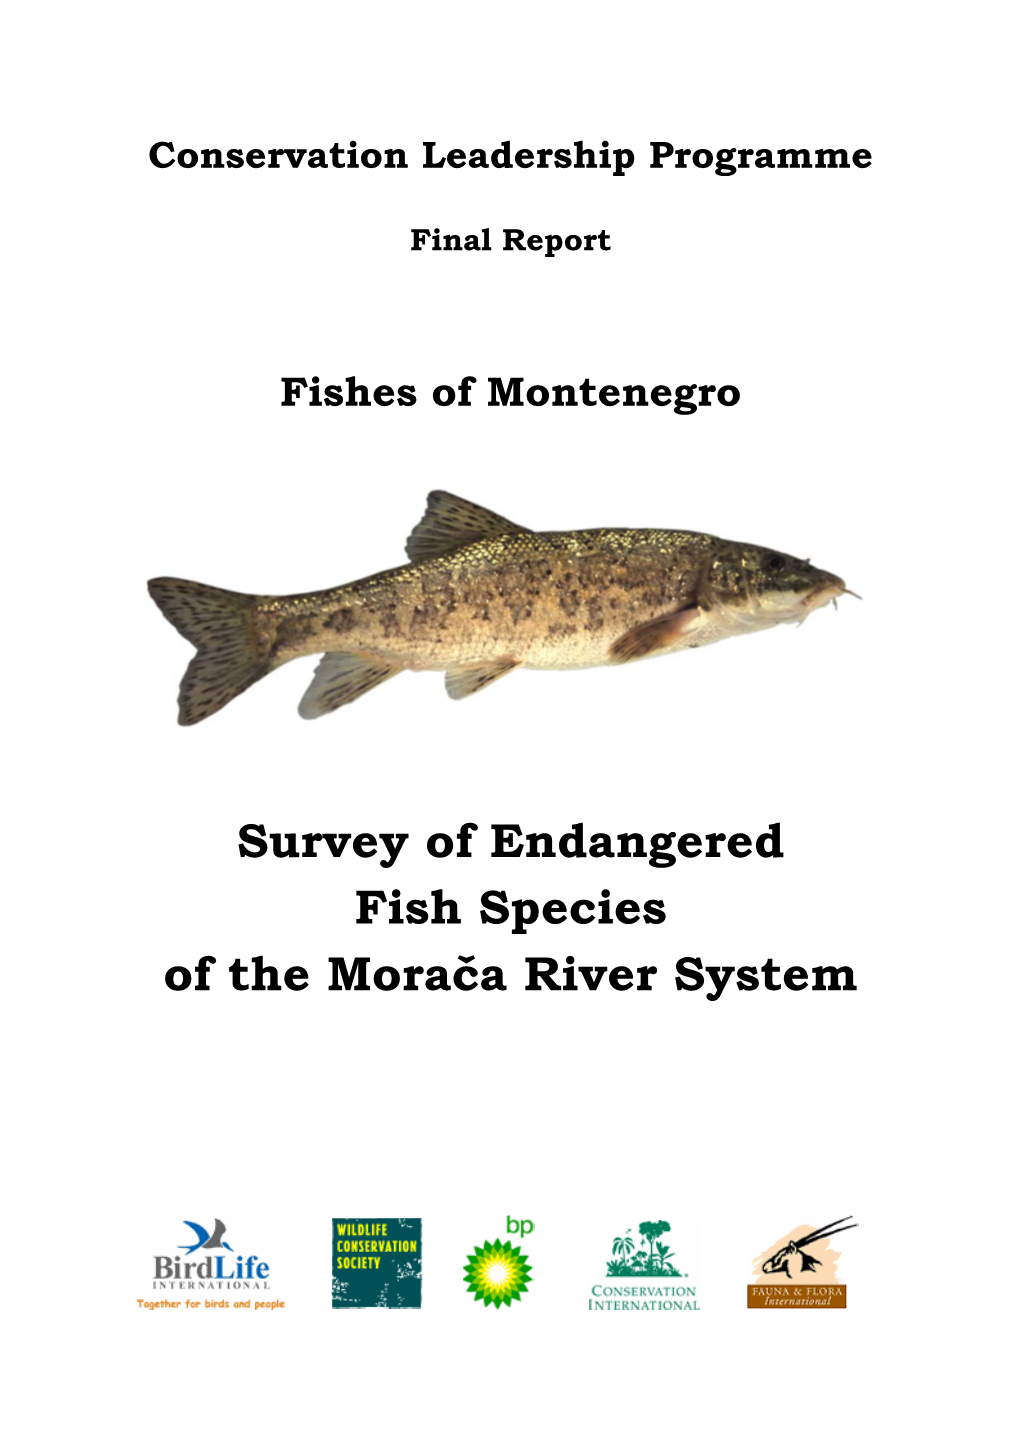 Fishes of Montenegro